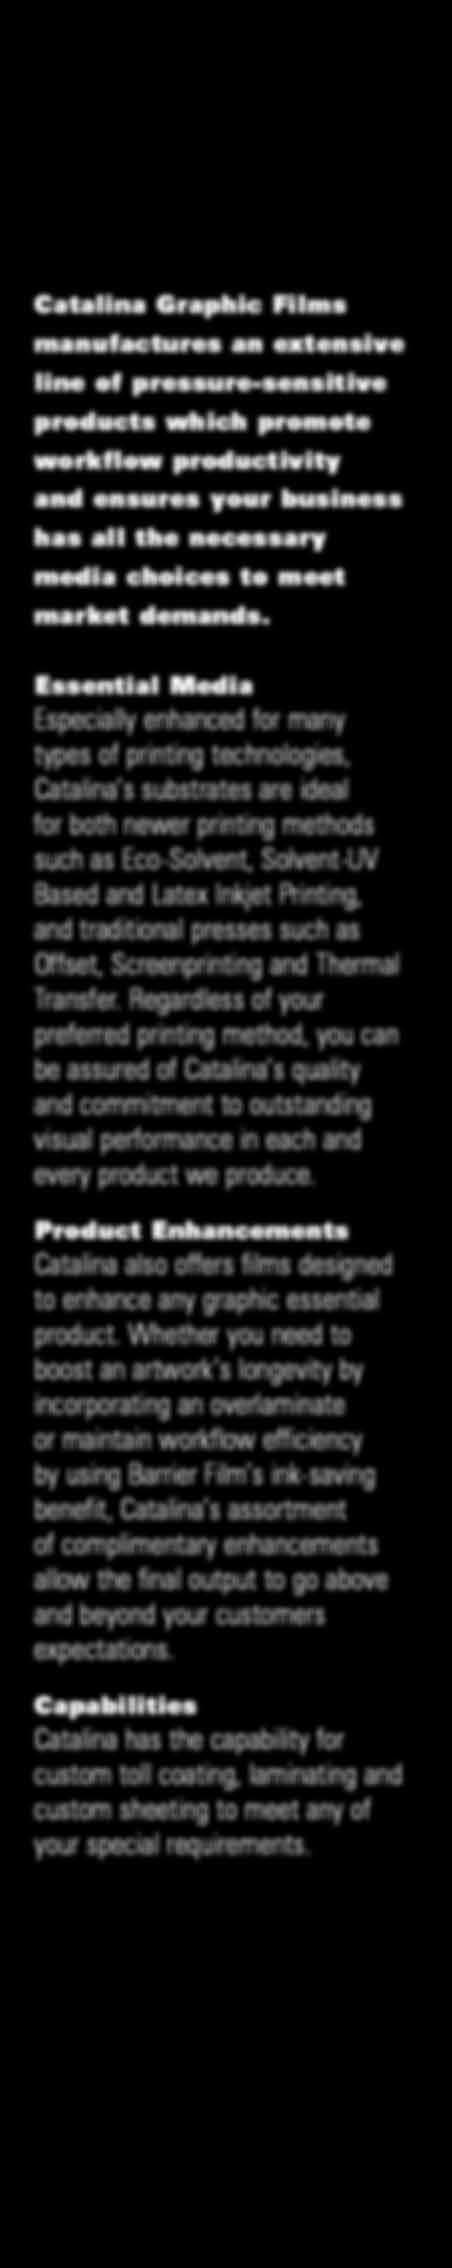 Essential Media Especially enhanced for many types of printing technologies, Catalina s substrates are ideal for both newer printing methods such as Eco-Solvent, Solvent-UV Based and Latex Inkjet